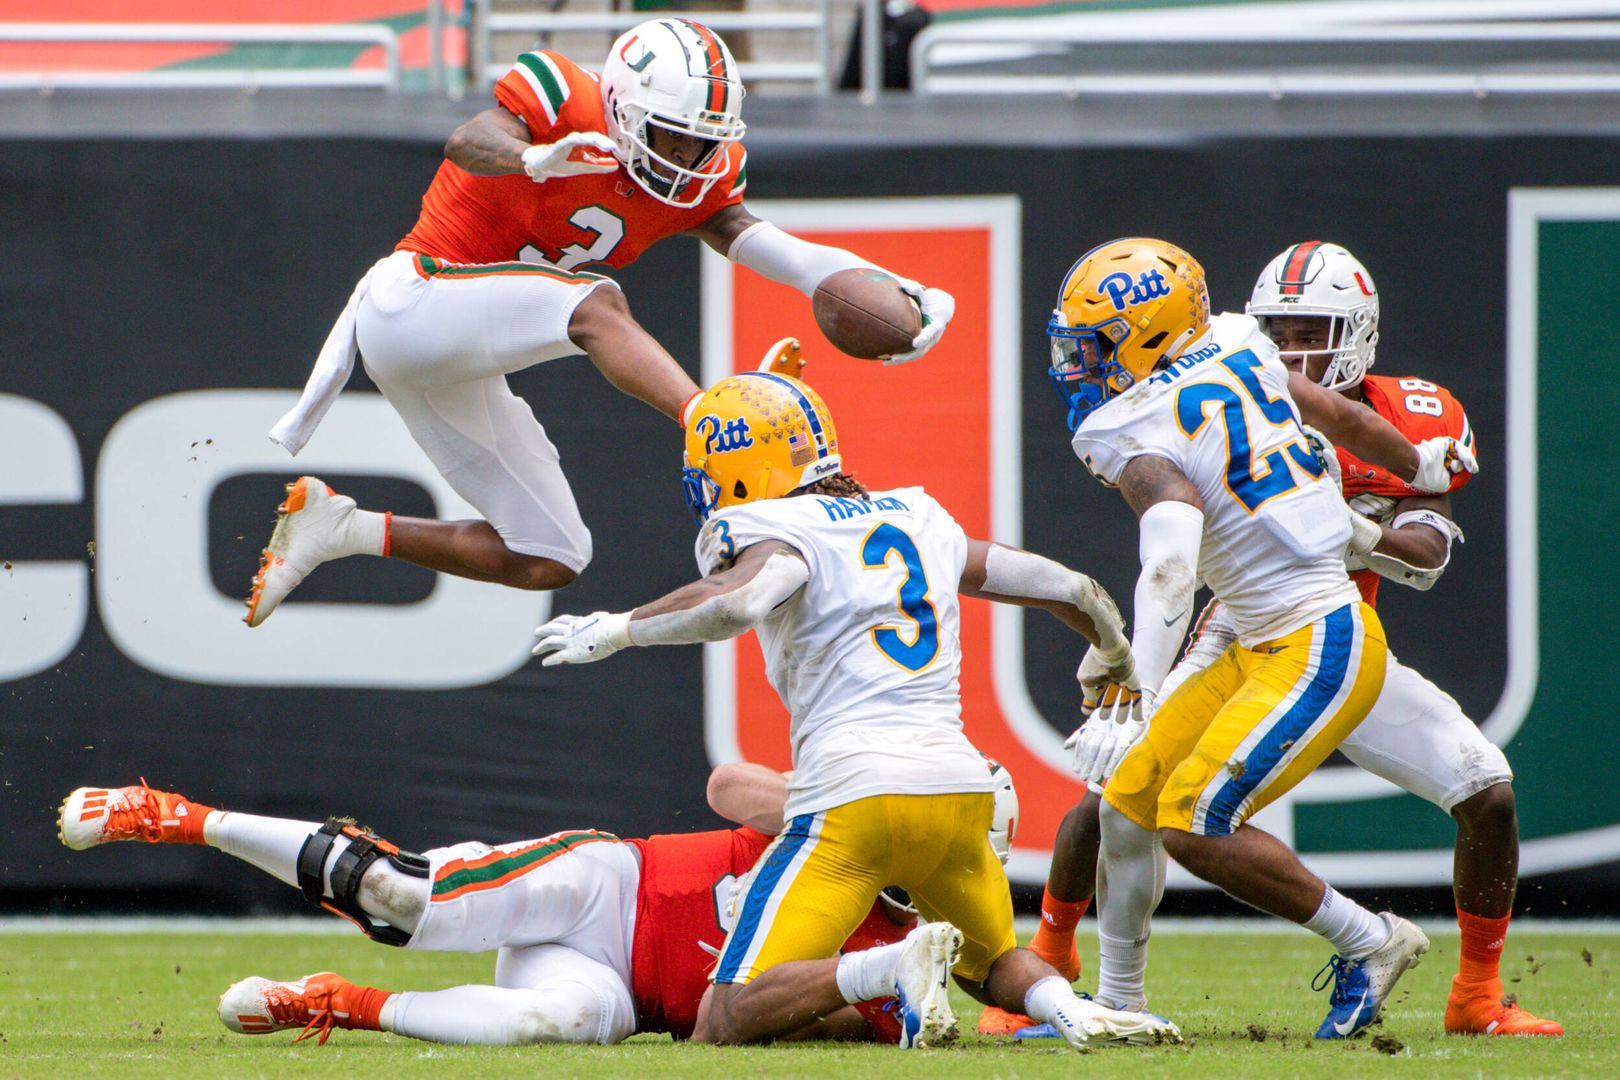 Canes Bounce Back with Win over Pitt